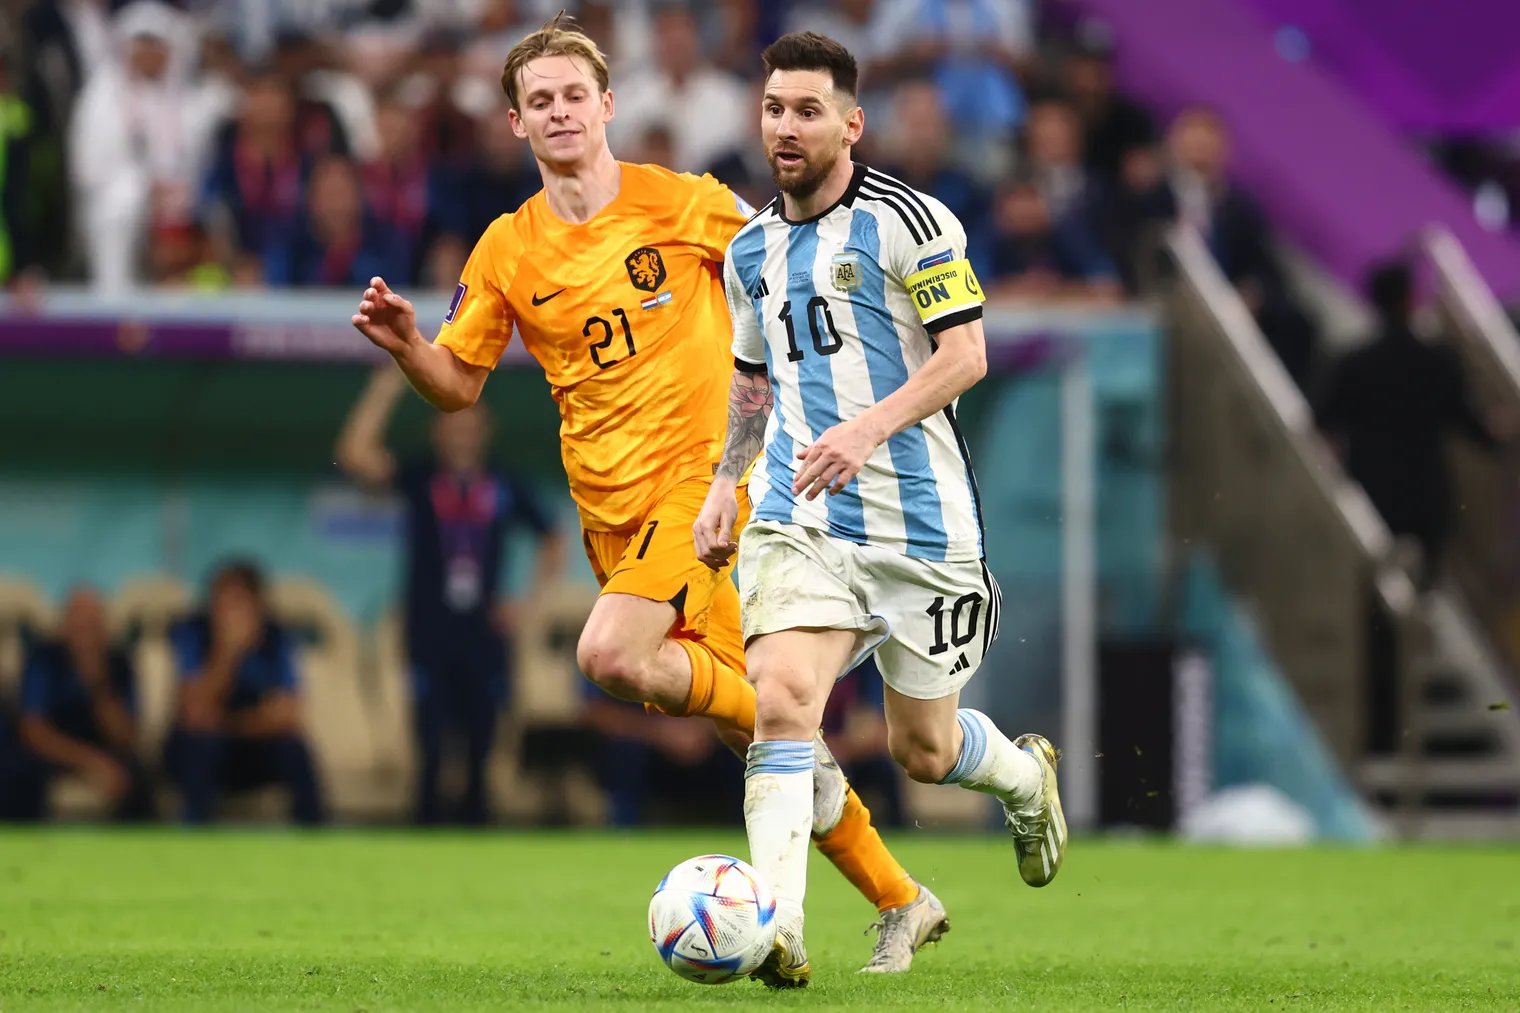 Read more about the article Netherlands vs Argentina: Argentina prevails over the Netherlands in a penalty shootout after blowing a two-goal lead.